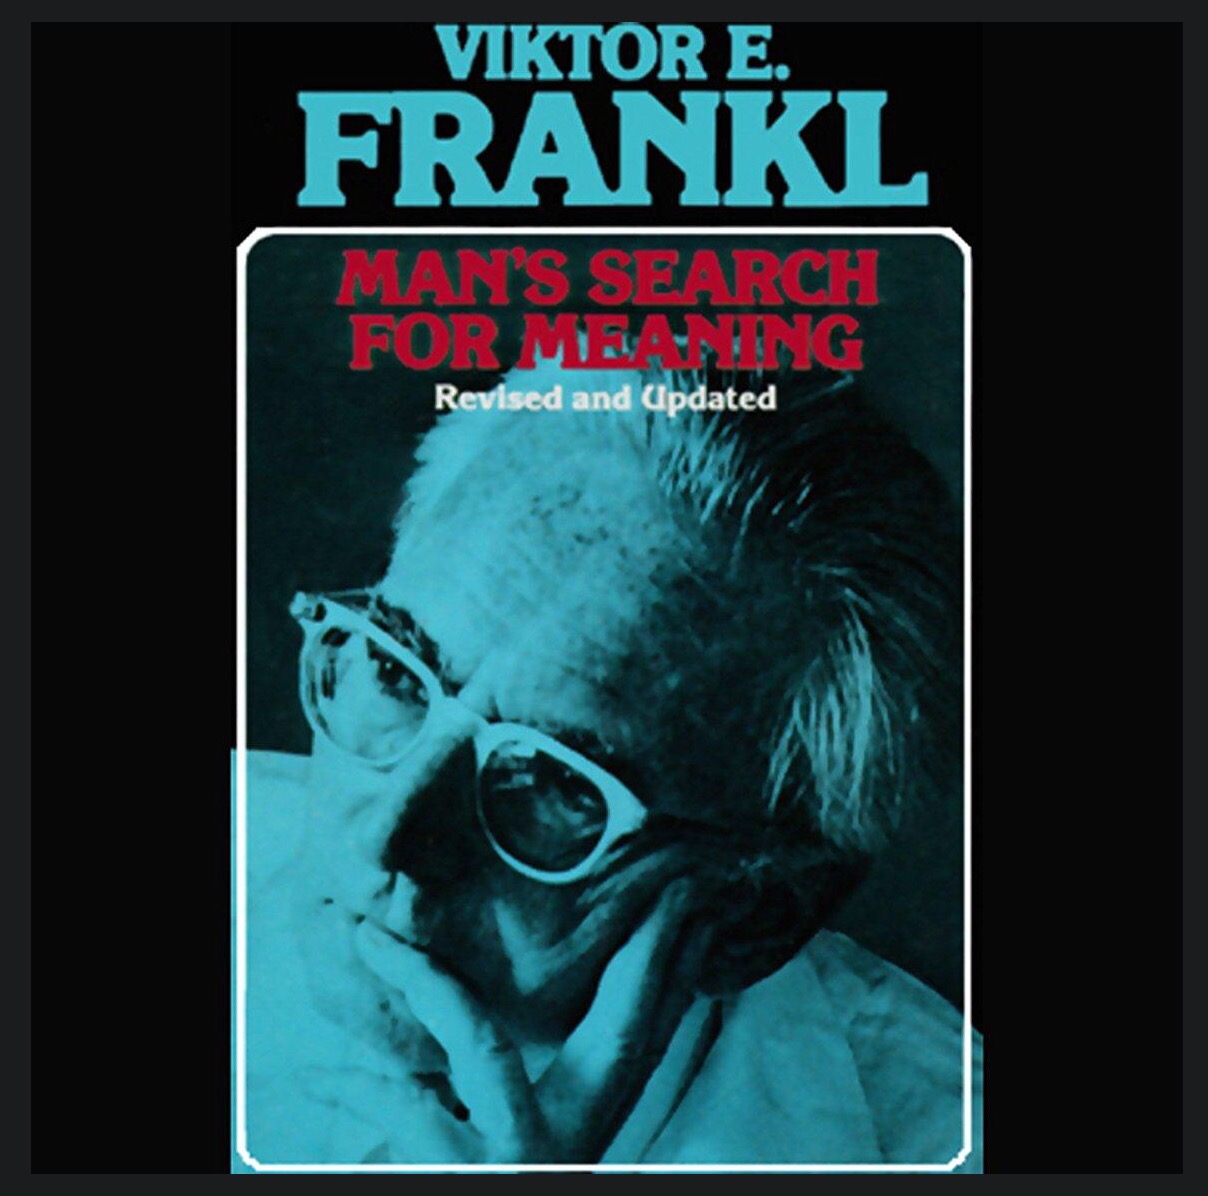 Viktor Frankl's "Man's Search for Meaning" - No Wanky Bollocks